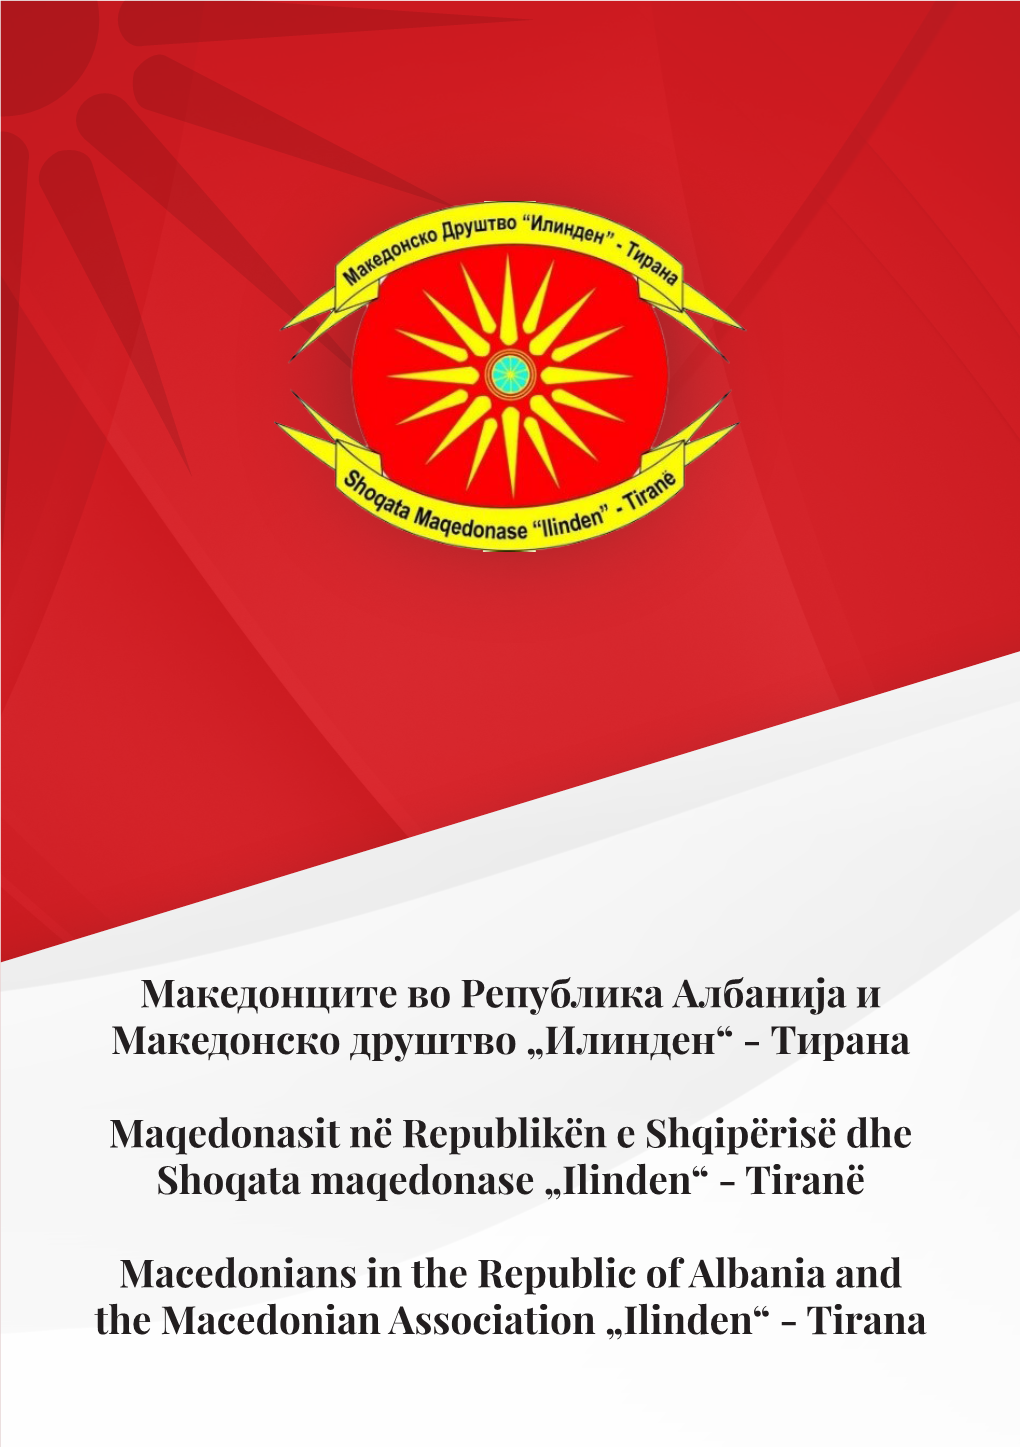 Macedonians in the Republic of Albania and the Macedonian